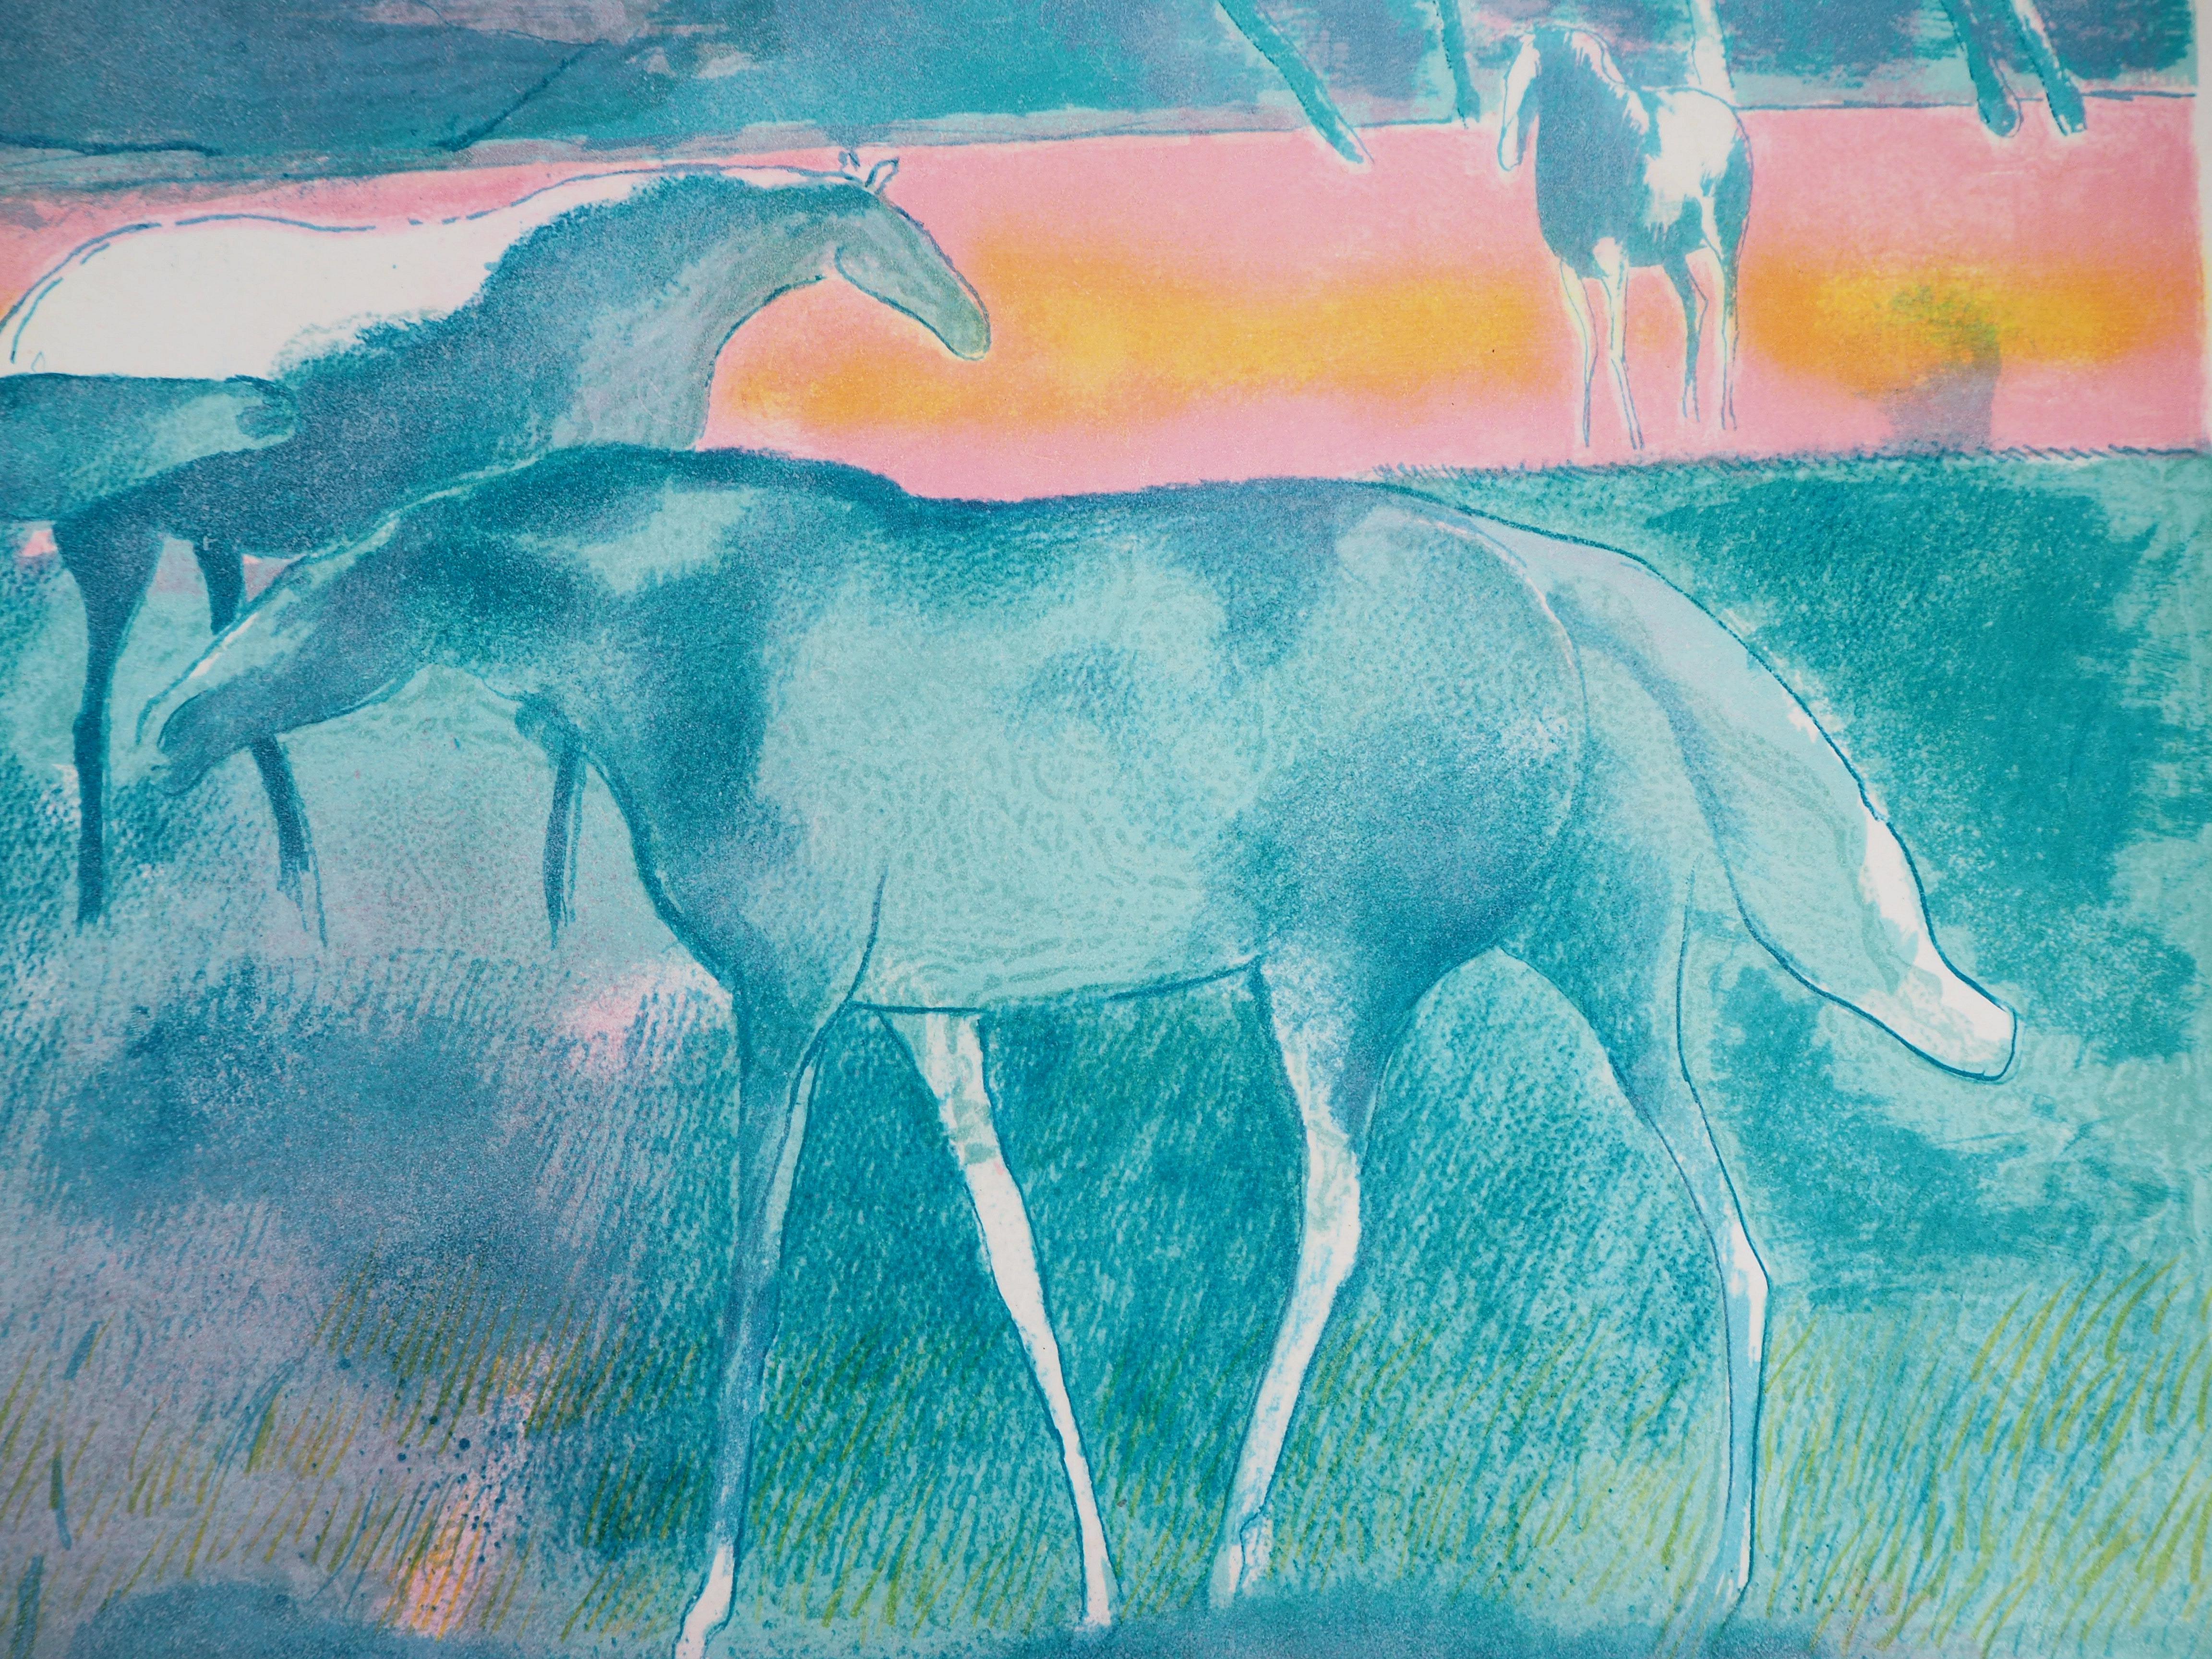 Horses at sunset - Original lithograph, Handsigned - Blue Animal Painting by Paul Guiramand